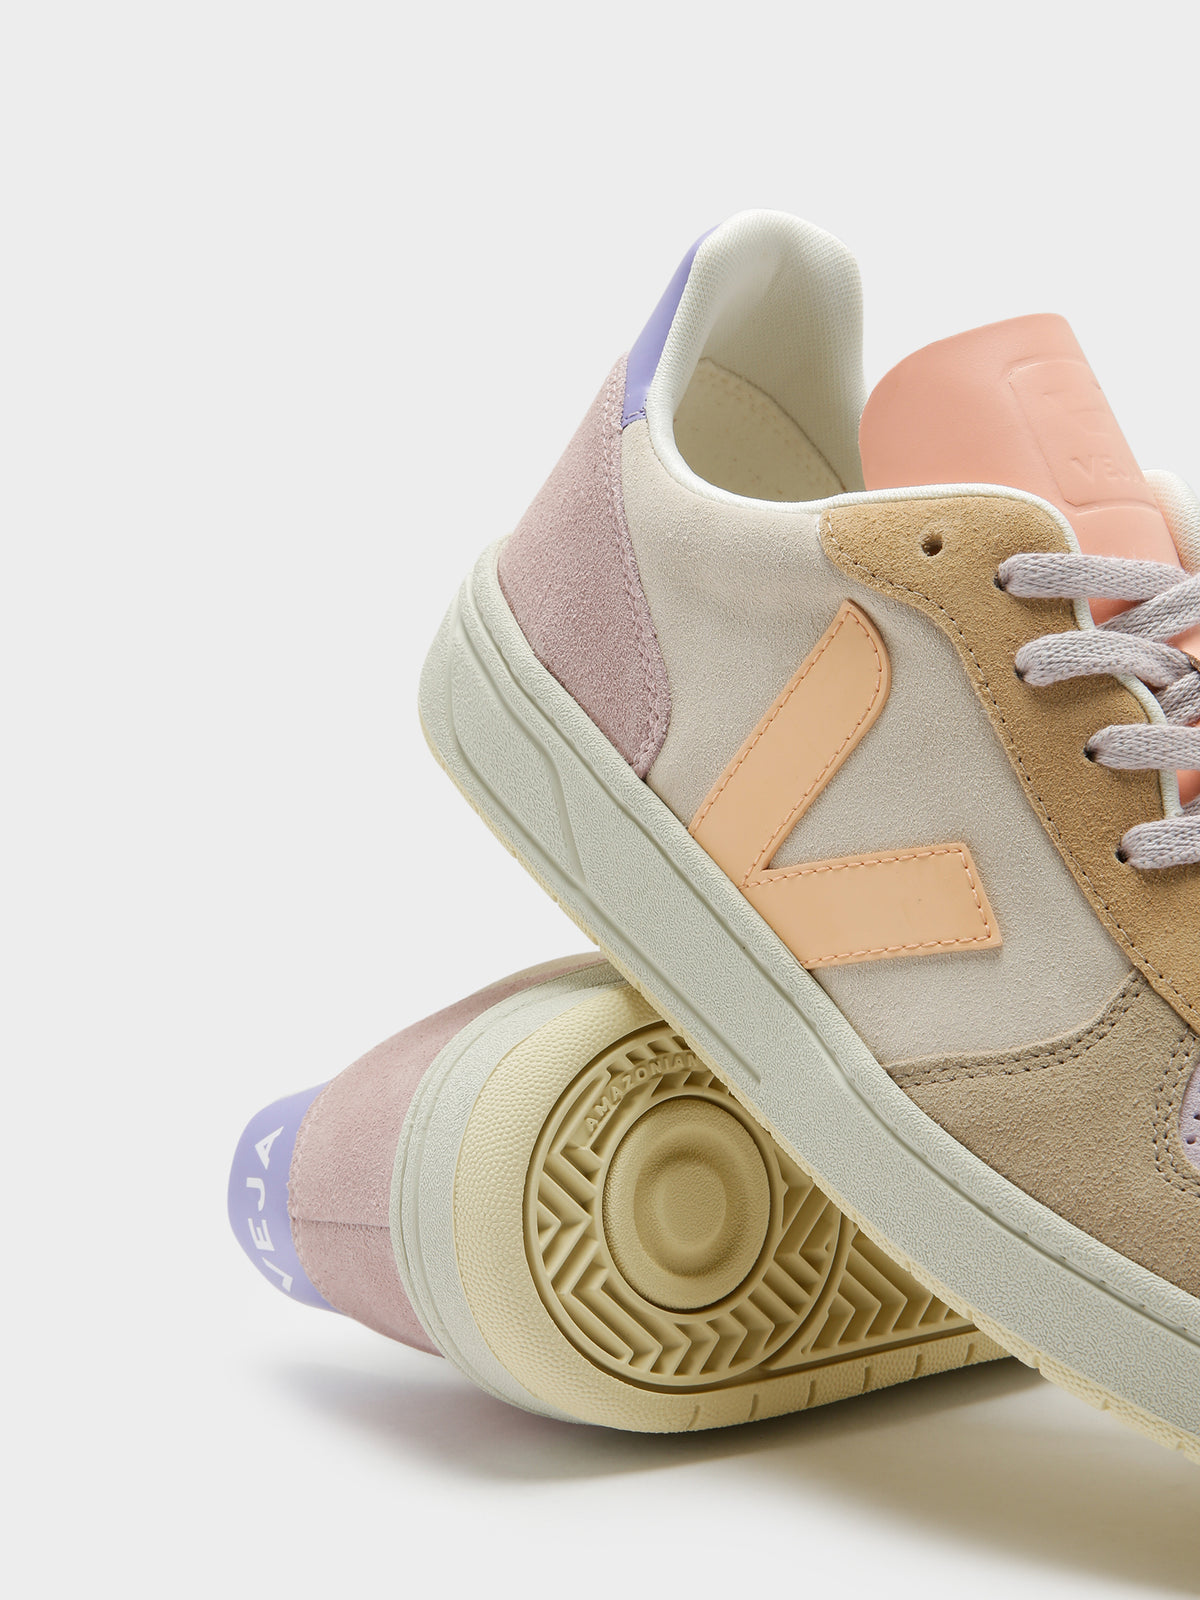 Unisex V-10 Leather Sneakers in Multicolour Peach